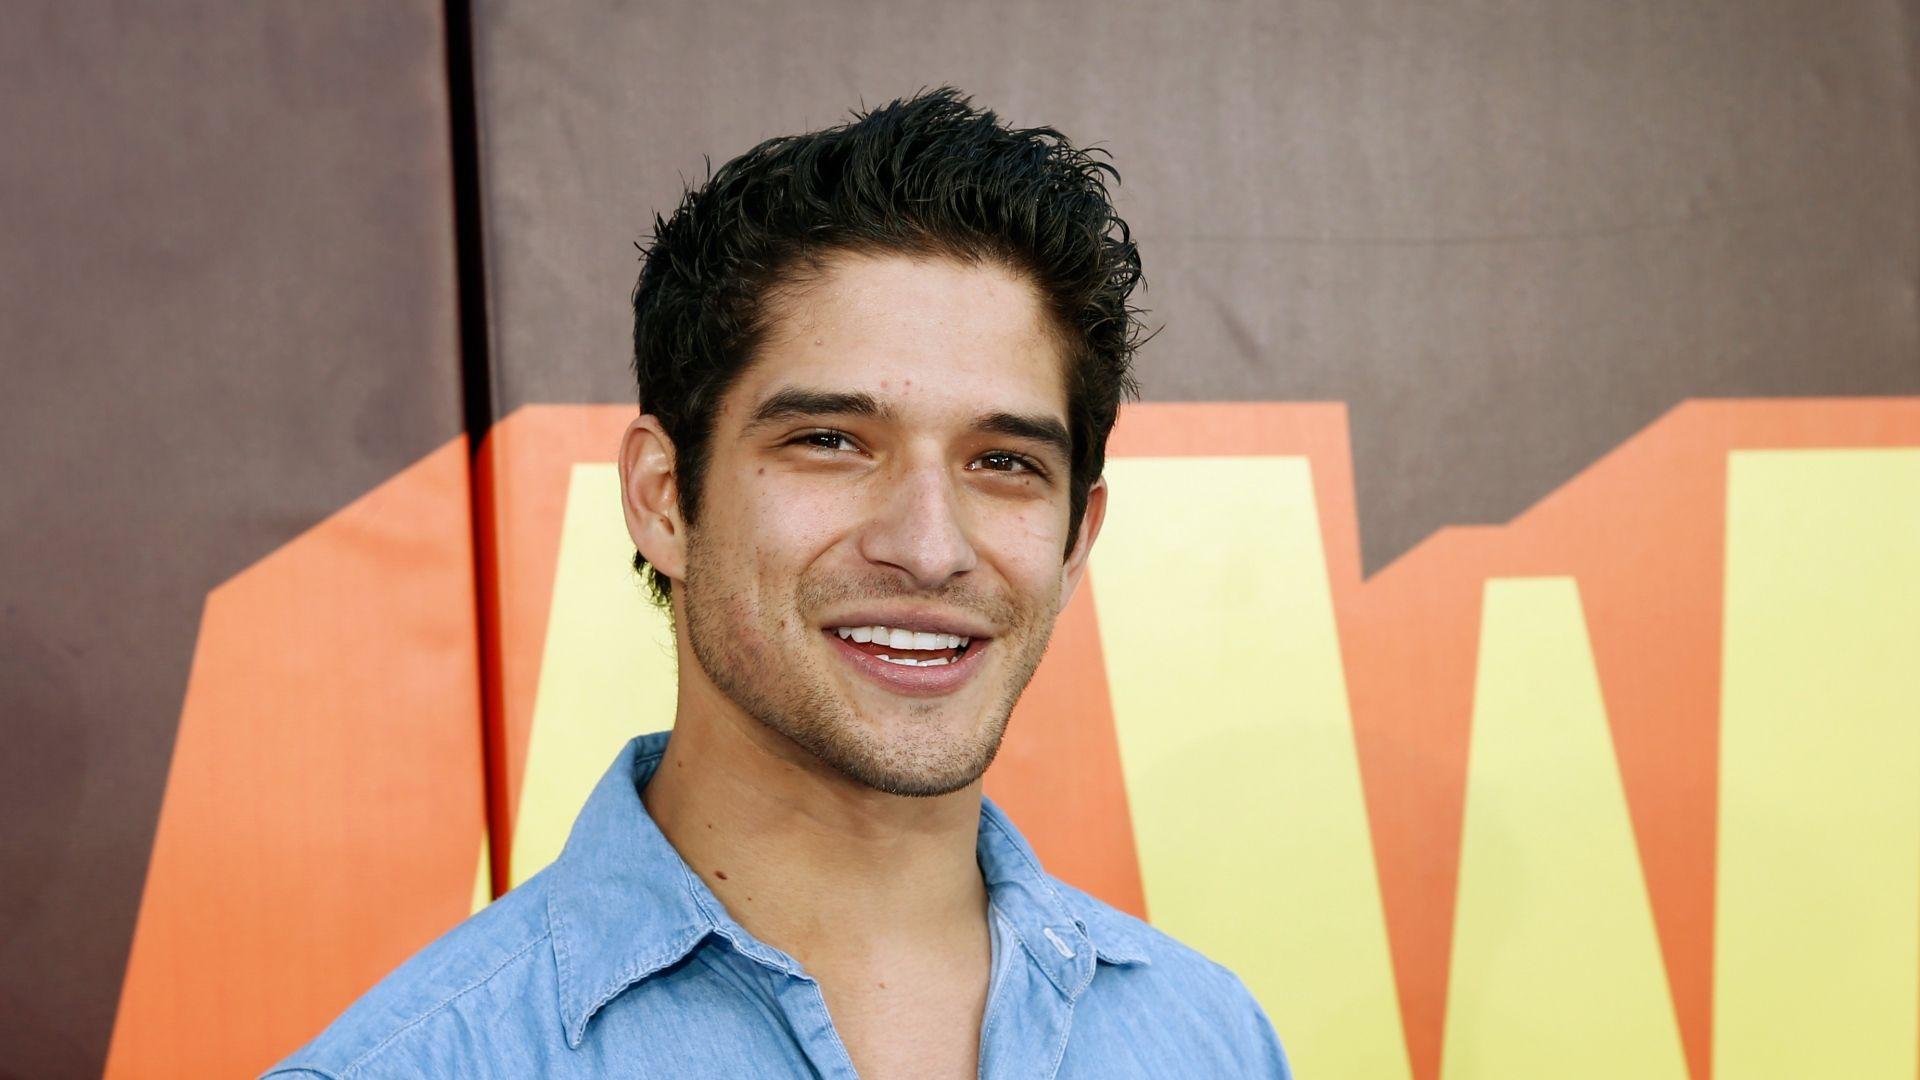 Download Wallpaper 1920x1080 Tyler posey, Actor, Smile, Face Full